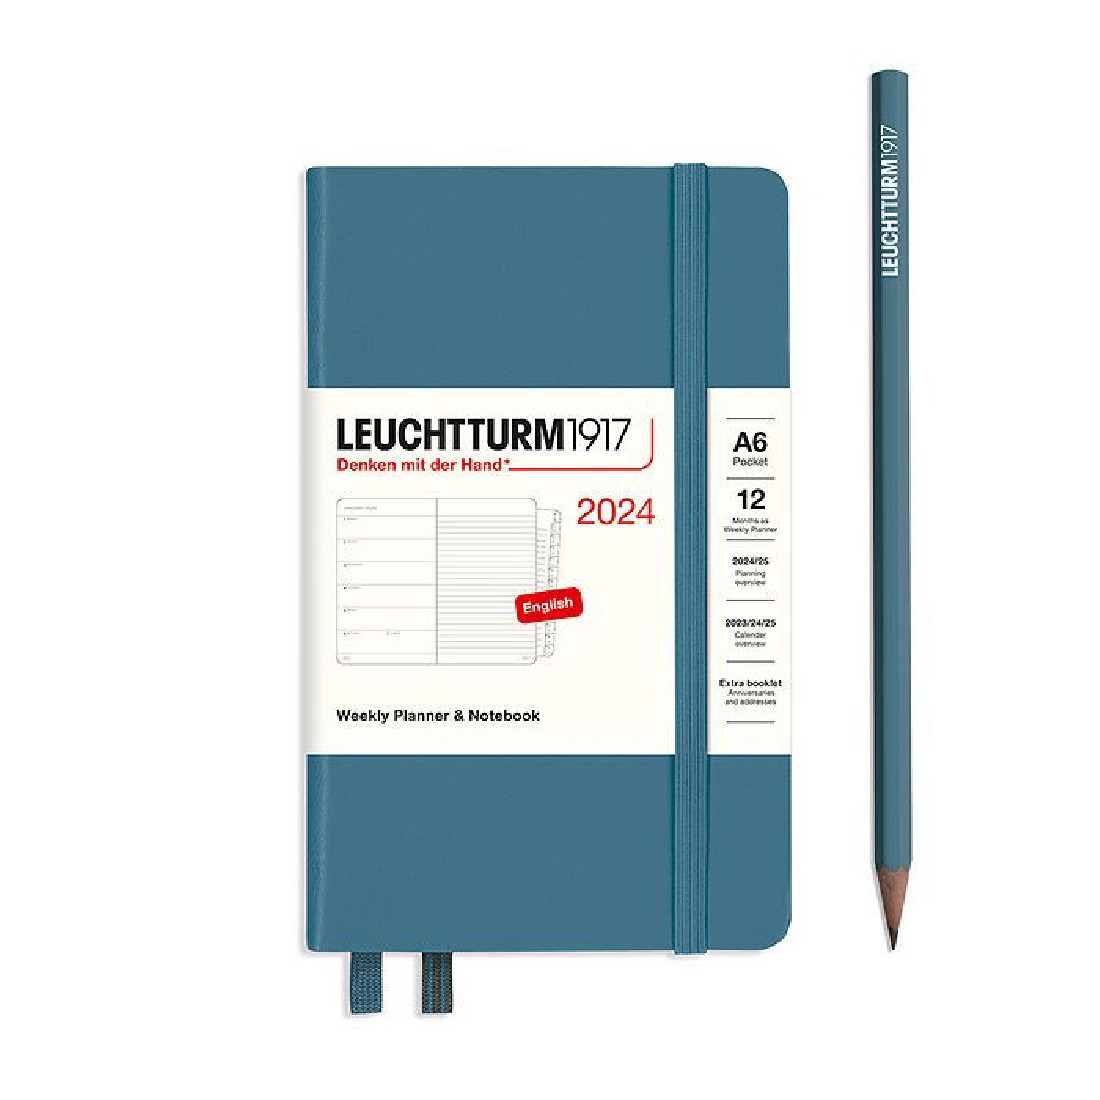 Leuchtturm 1917 Weekly Planner and Notebook 2024 Stone Blue Pocket A6 Hard Cover